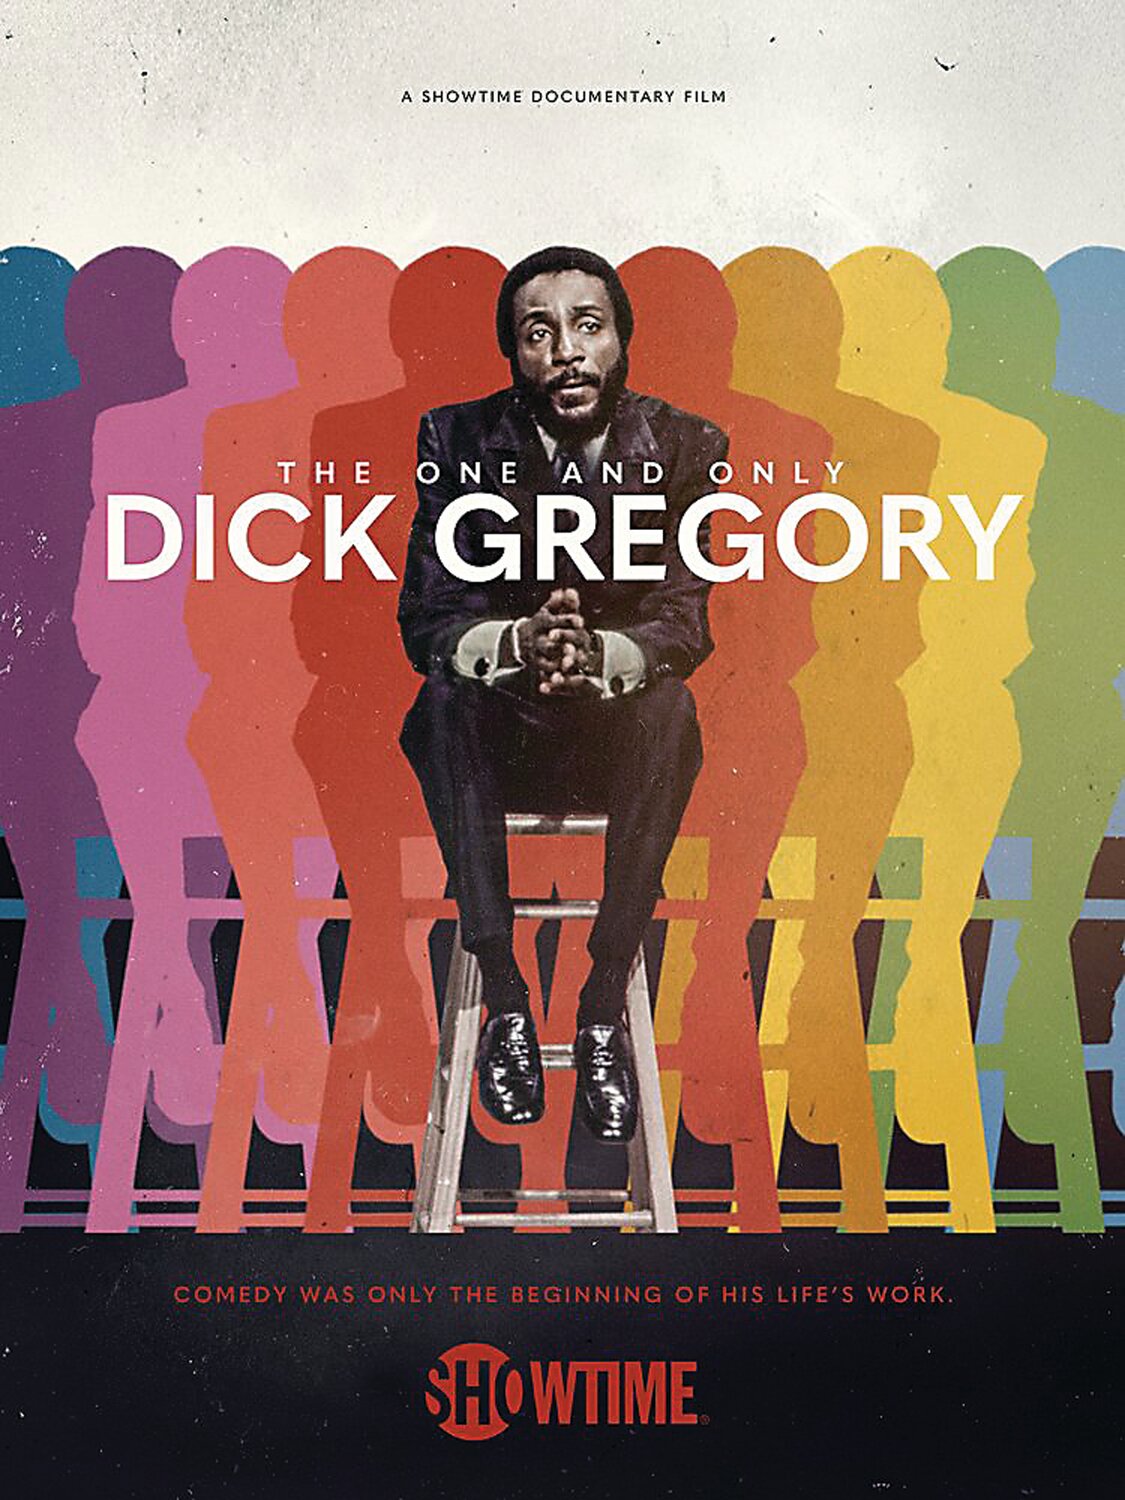 Acme Screening Room to present documentary on life and career of Dick Gregory.